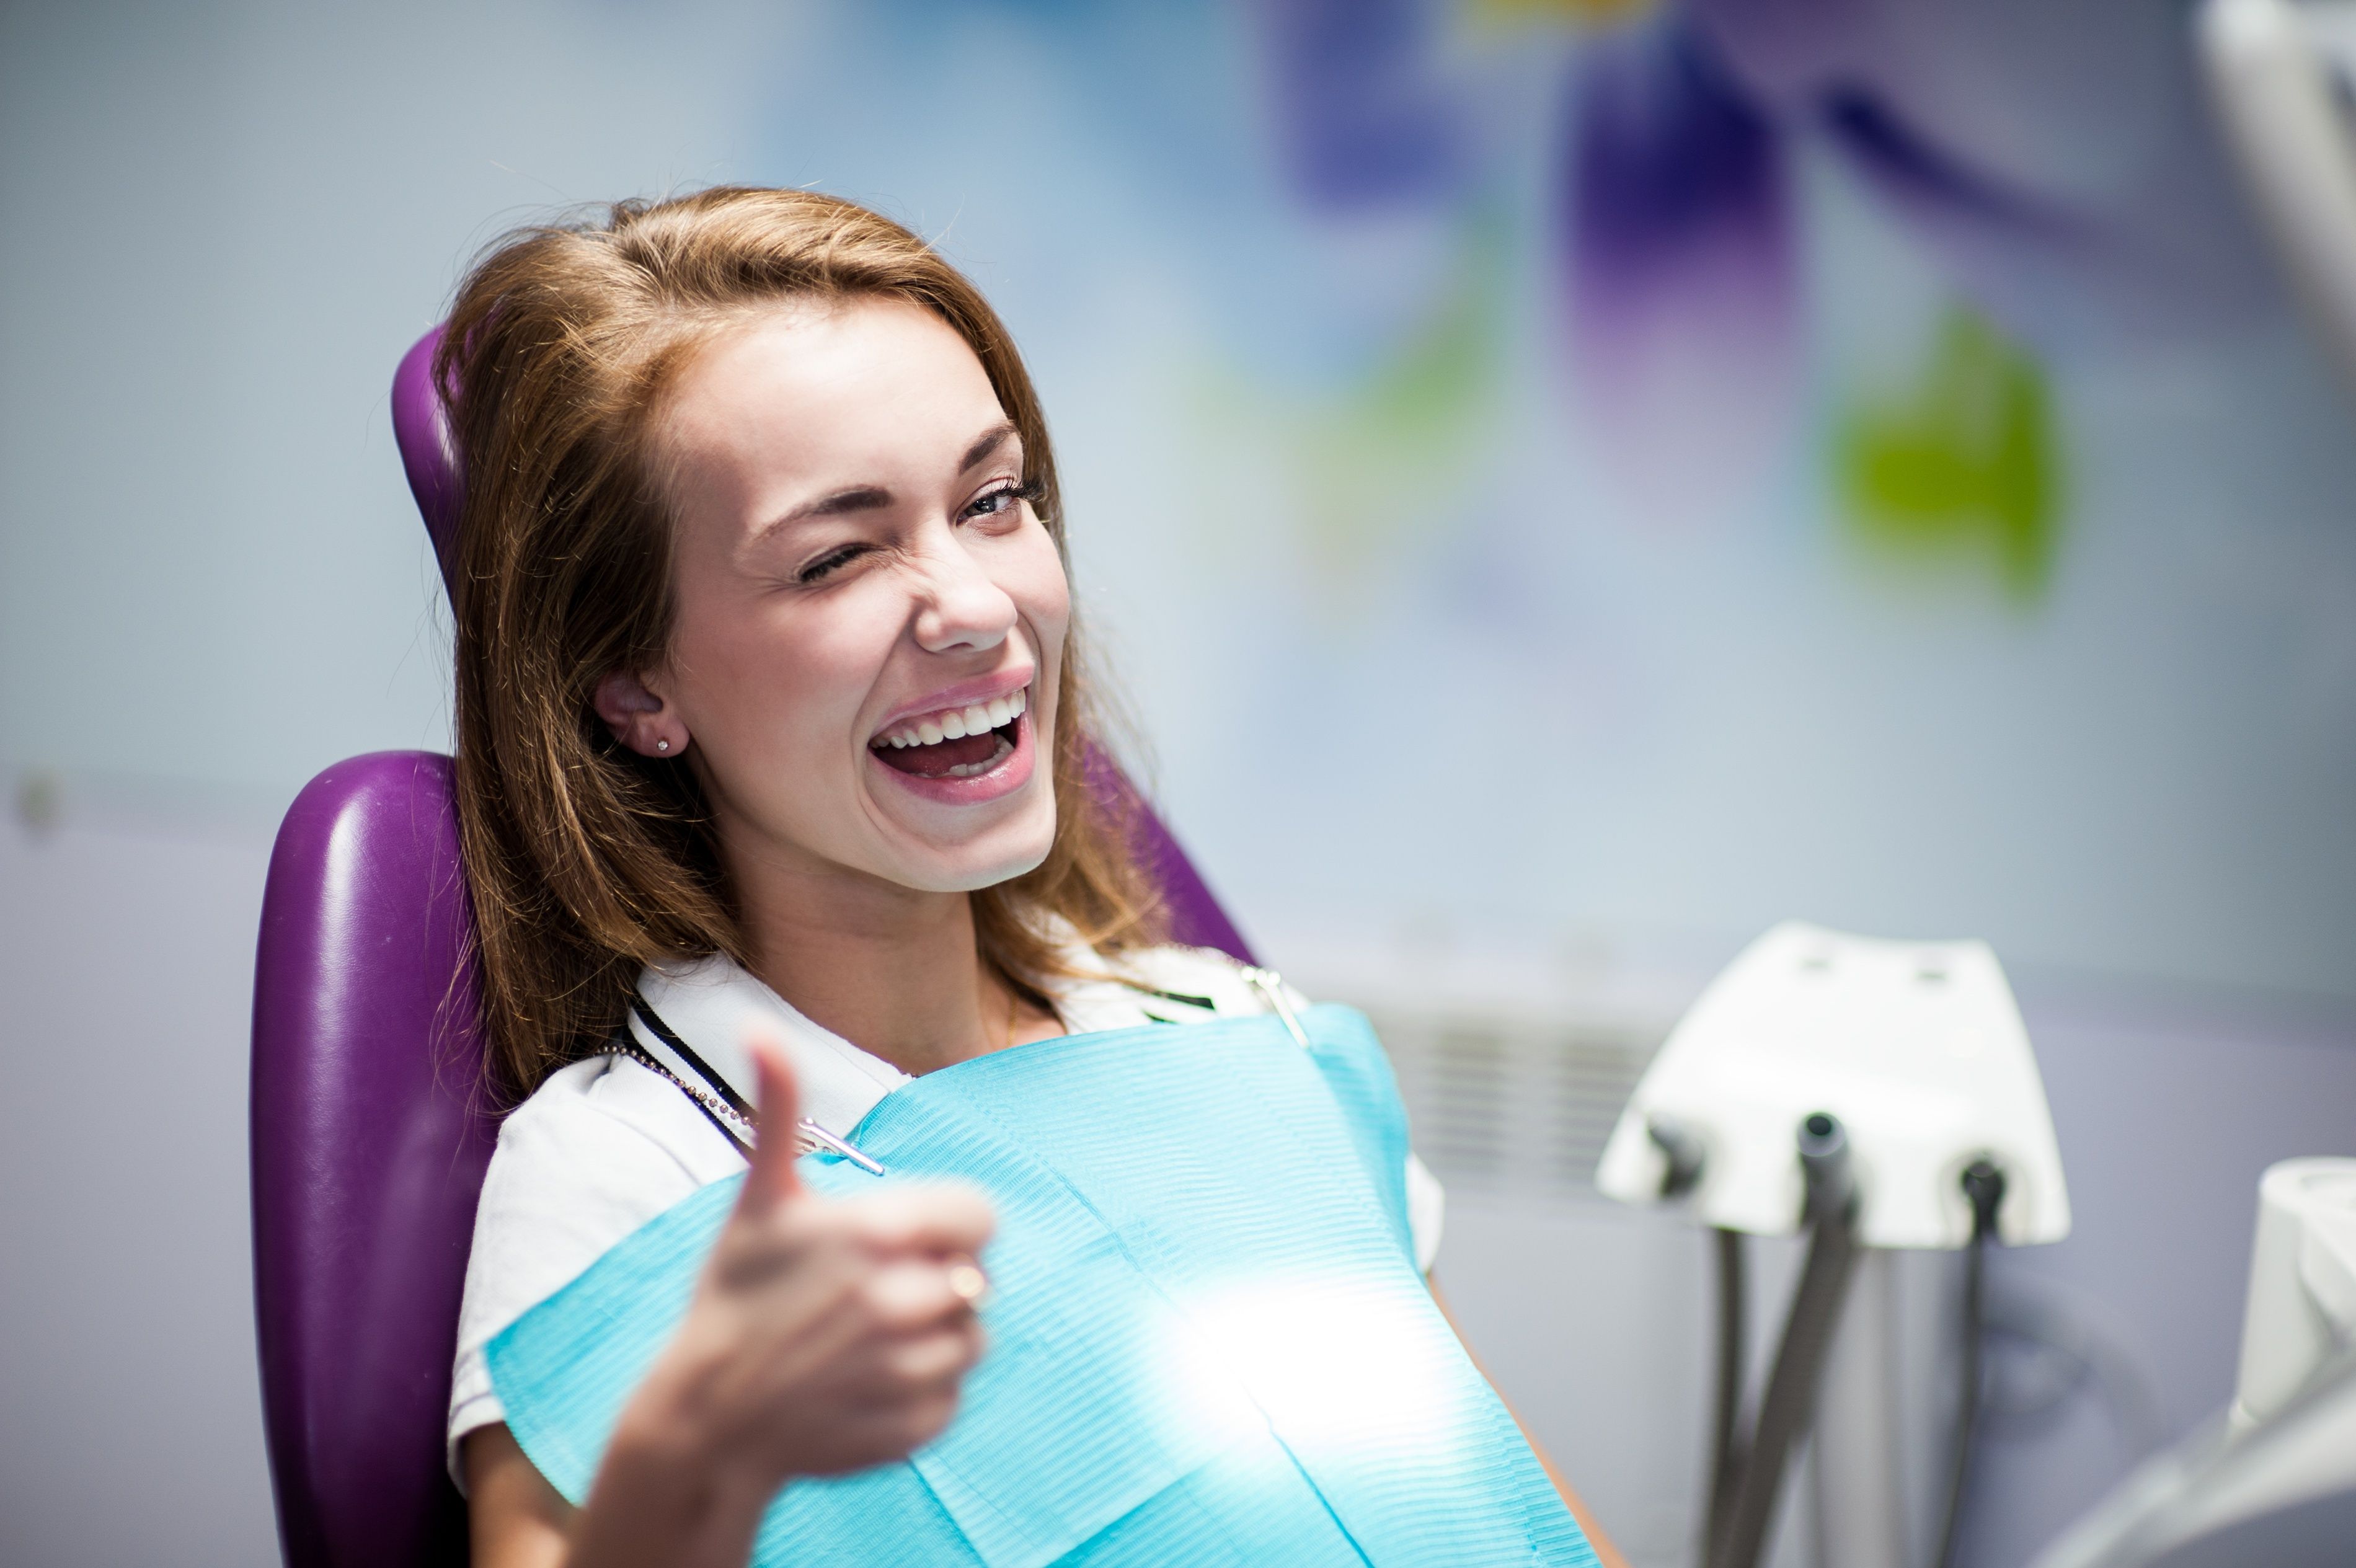 Dentist Marketing: Marketing Tips to Boost Visibility